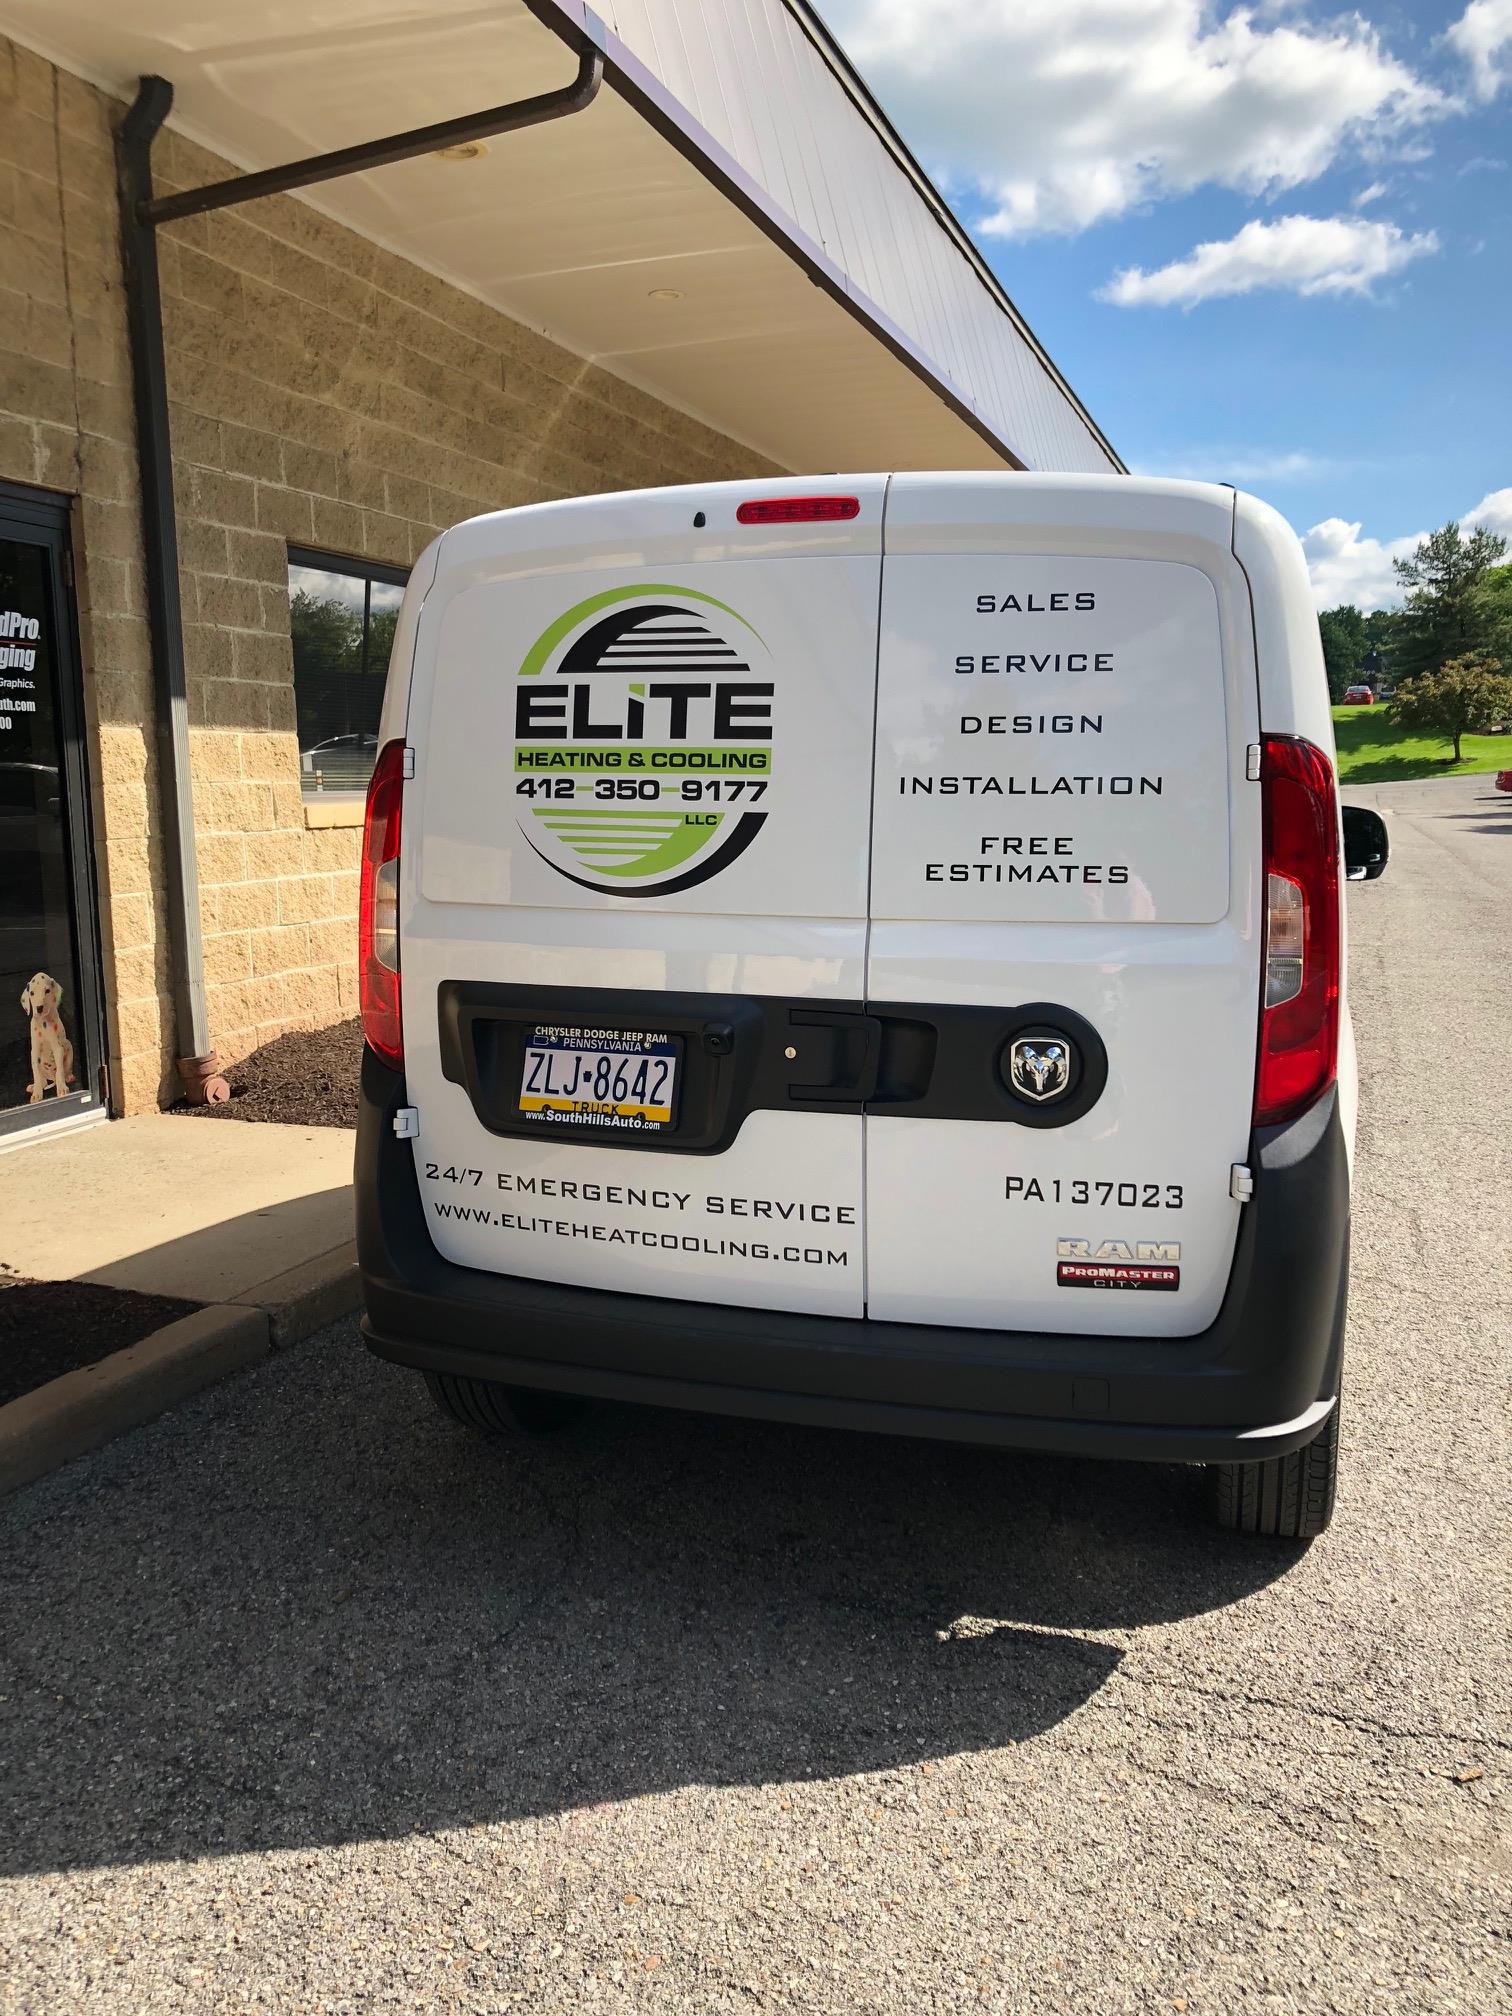 Elite Heating and Cooling decals on back of vehicle